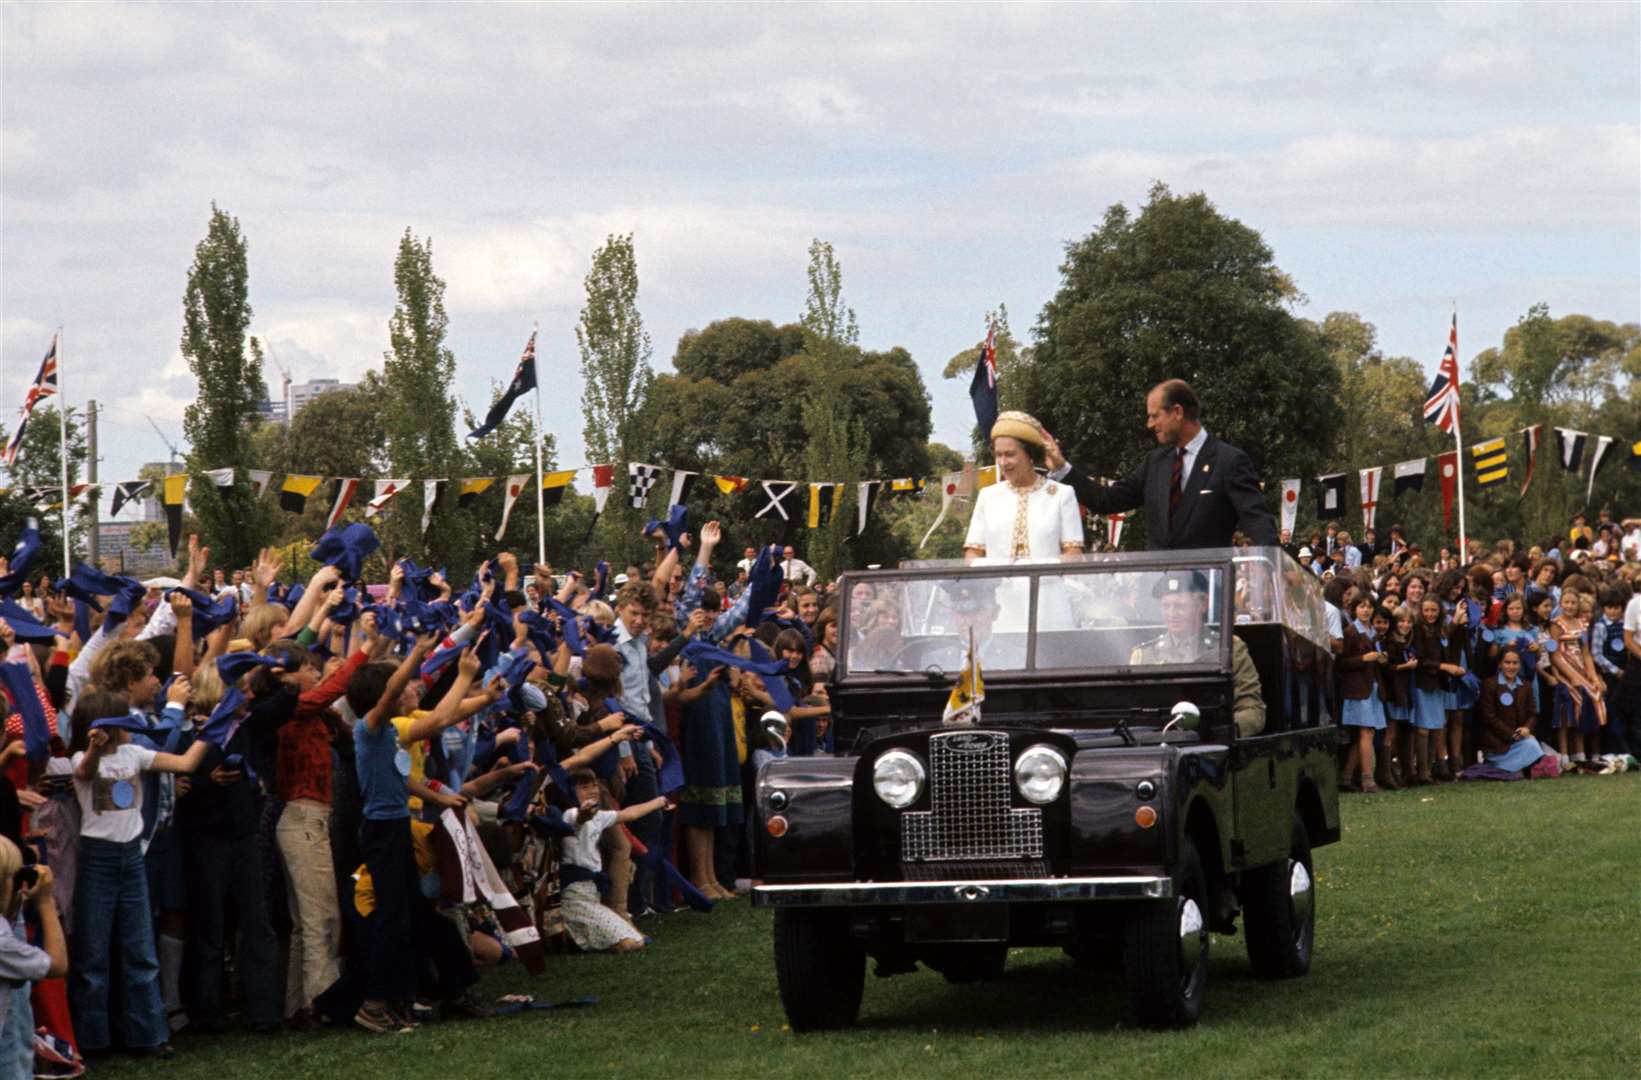 The Queen and Philip in an open Land Rover at a children’s rally in Royal Park, Melbourne (Ron Bell/PA)